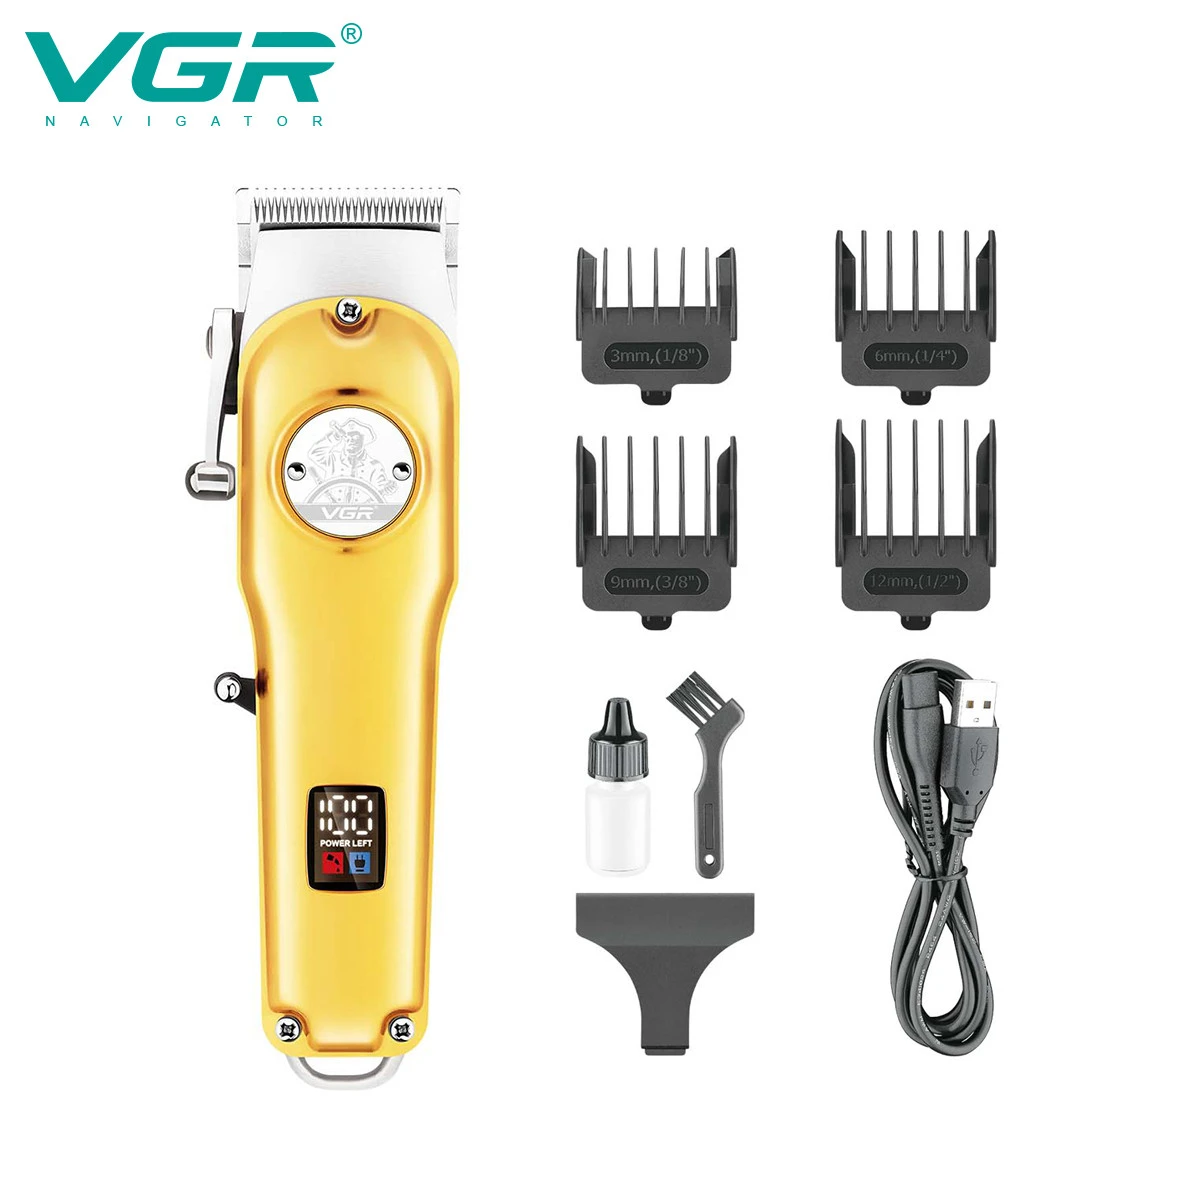 VGR V-181 barber hair clipper professional electric hair cutting trimmer with LED display